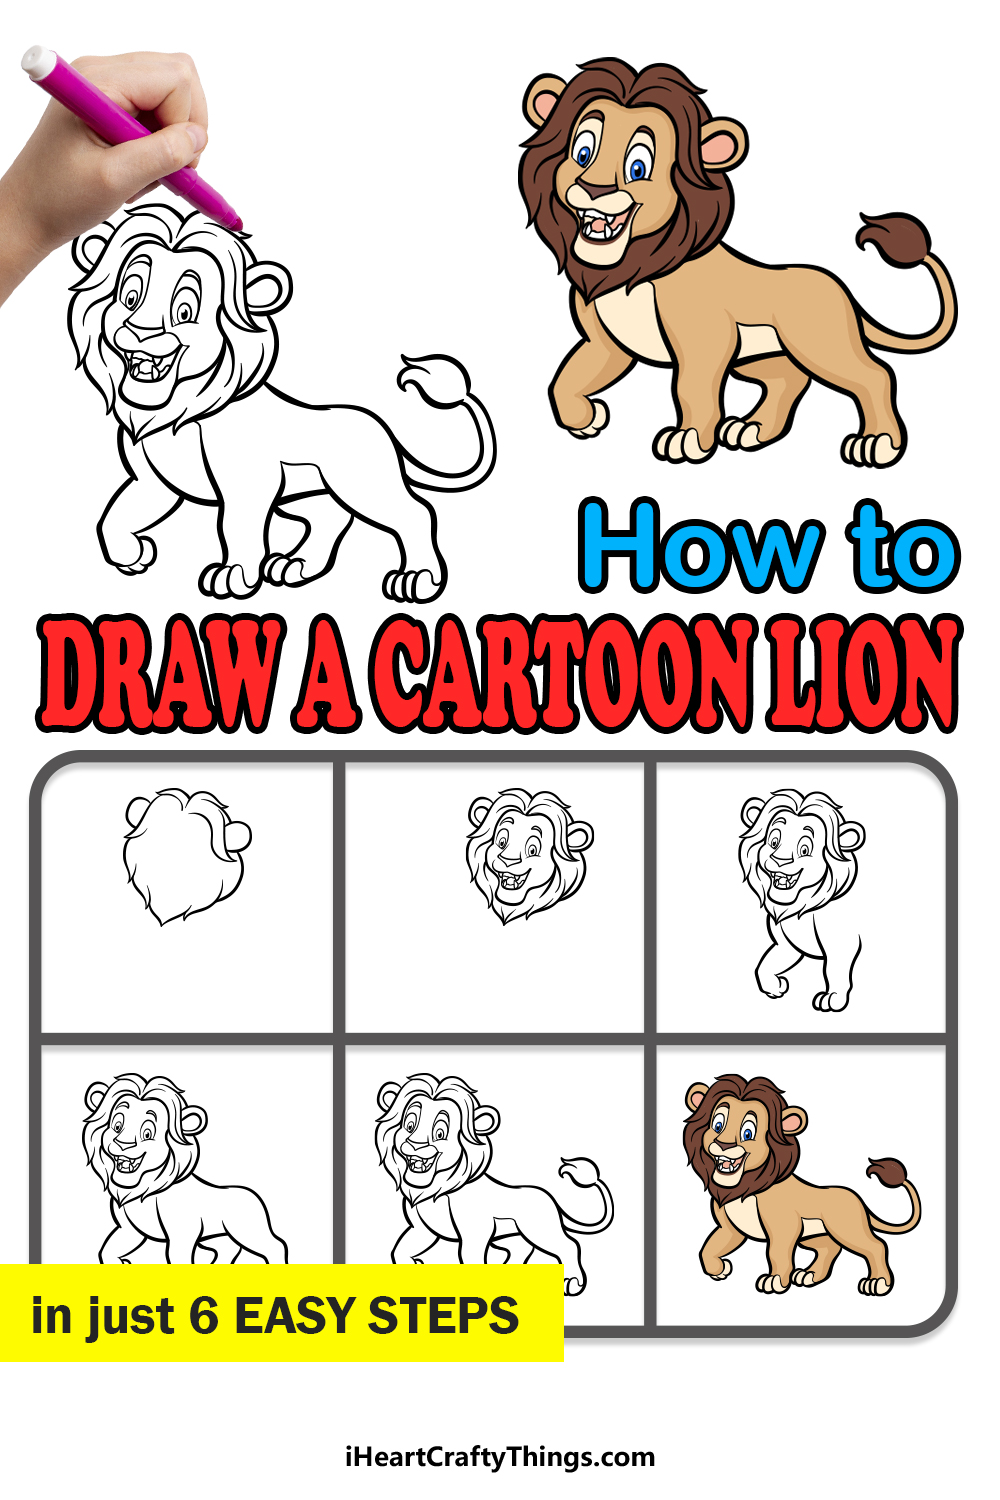 how to draw a cartoon lion in 6 easy steps